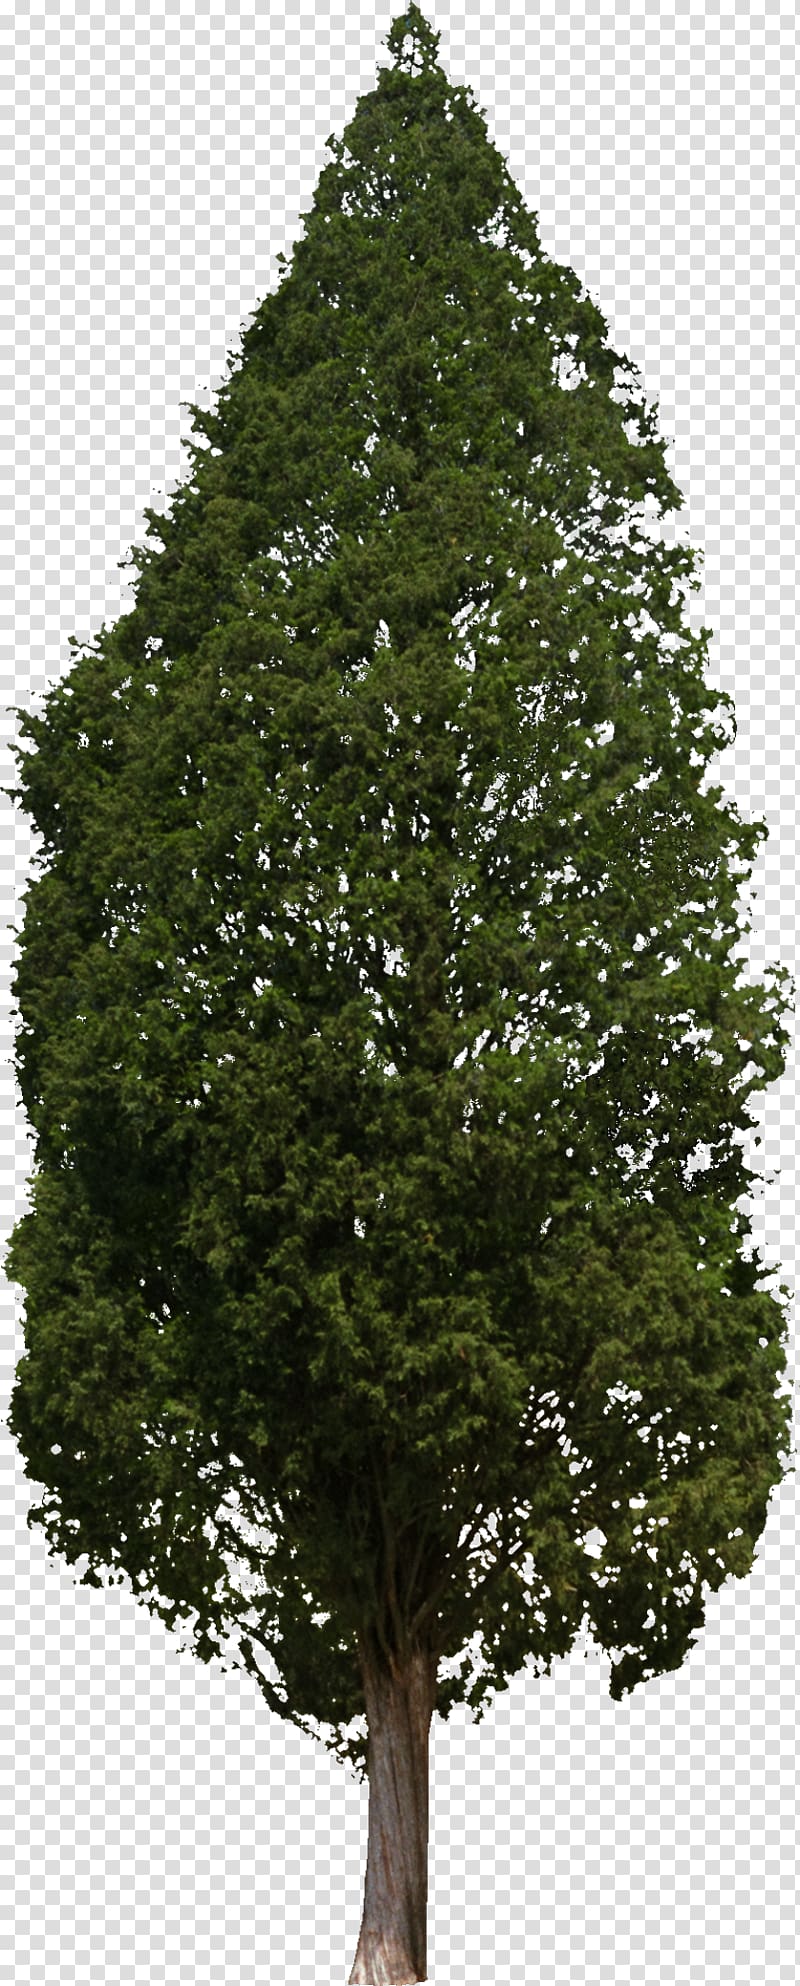 Christmas tree, Tree Woody plant Conifers Hinoki cypress, bushes transparent background PNG clipart